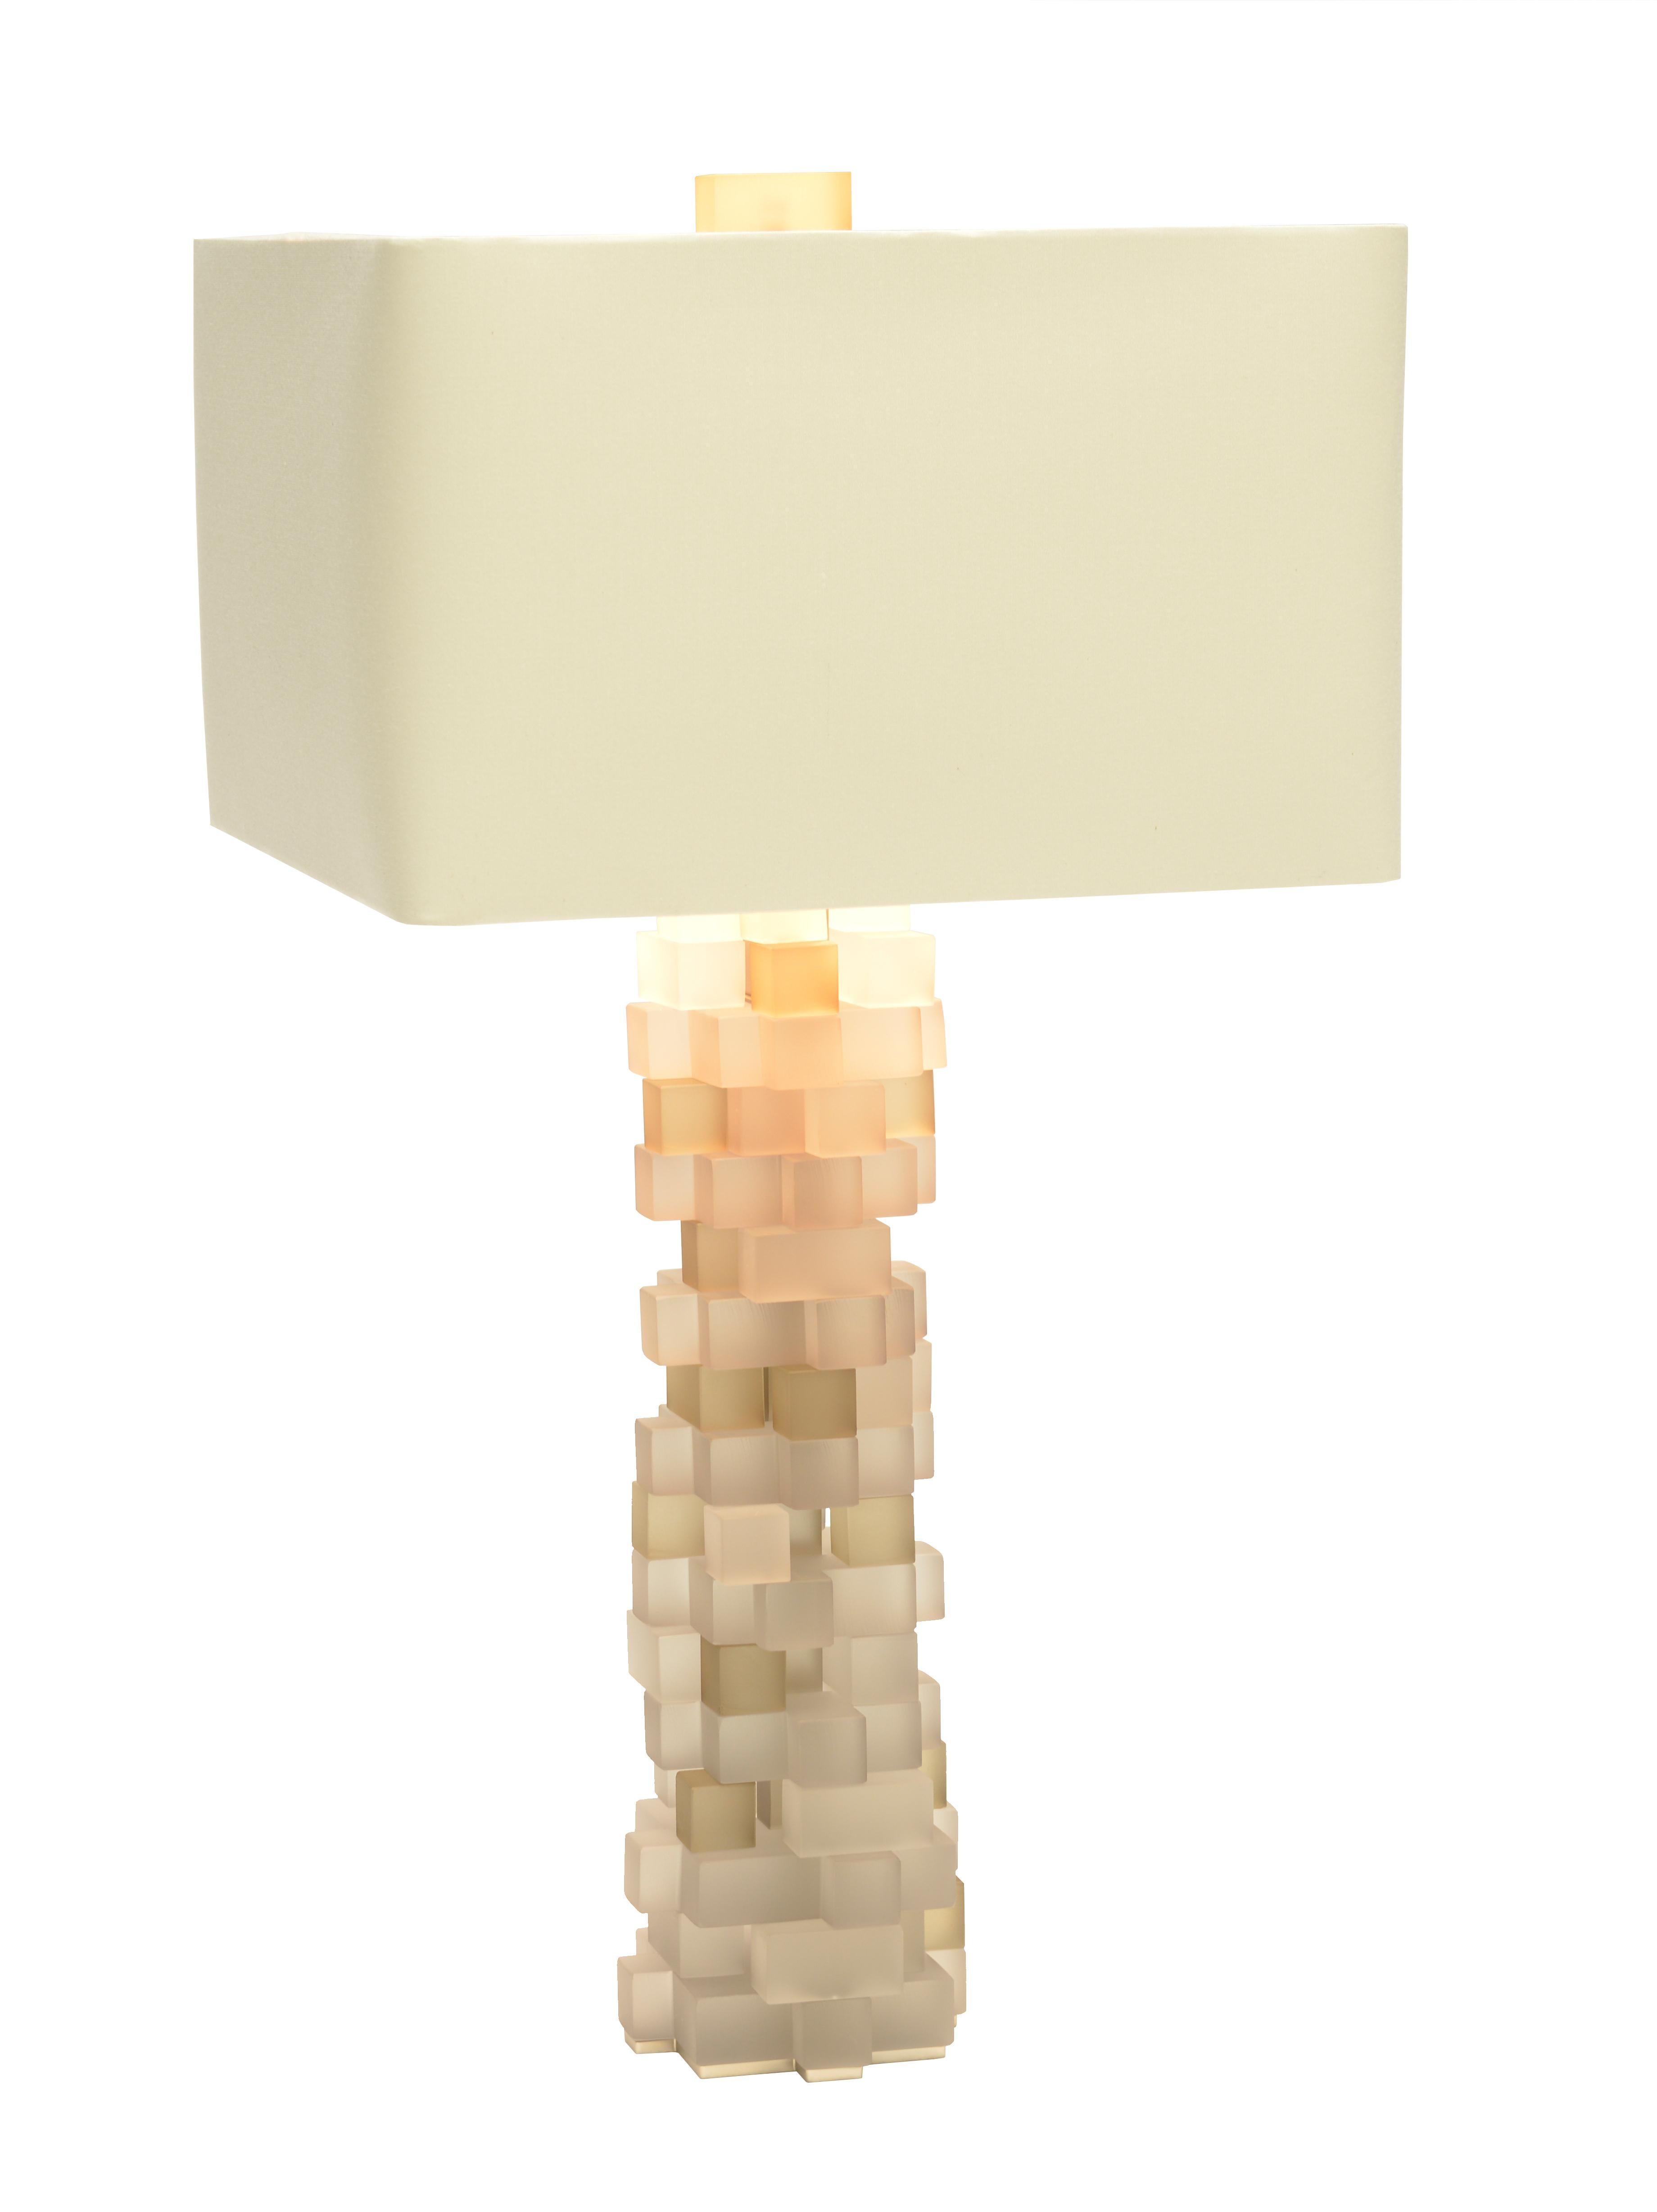 Druzy is cut from handmade Venetian clear glass blocks and stacked into a mineral-like formation. The collection emits the perfect balance of light through its interplay of geometric forms. A lavishly detailed lamp that is a true jewel for the home.